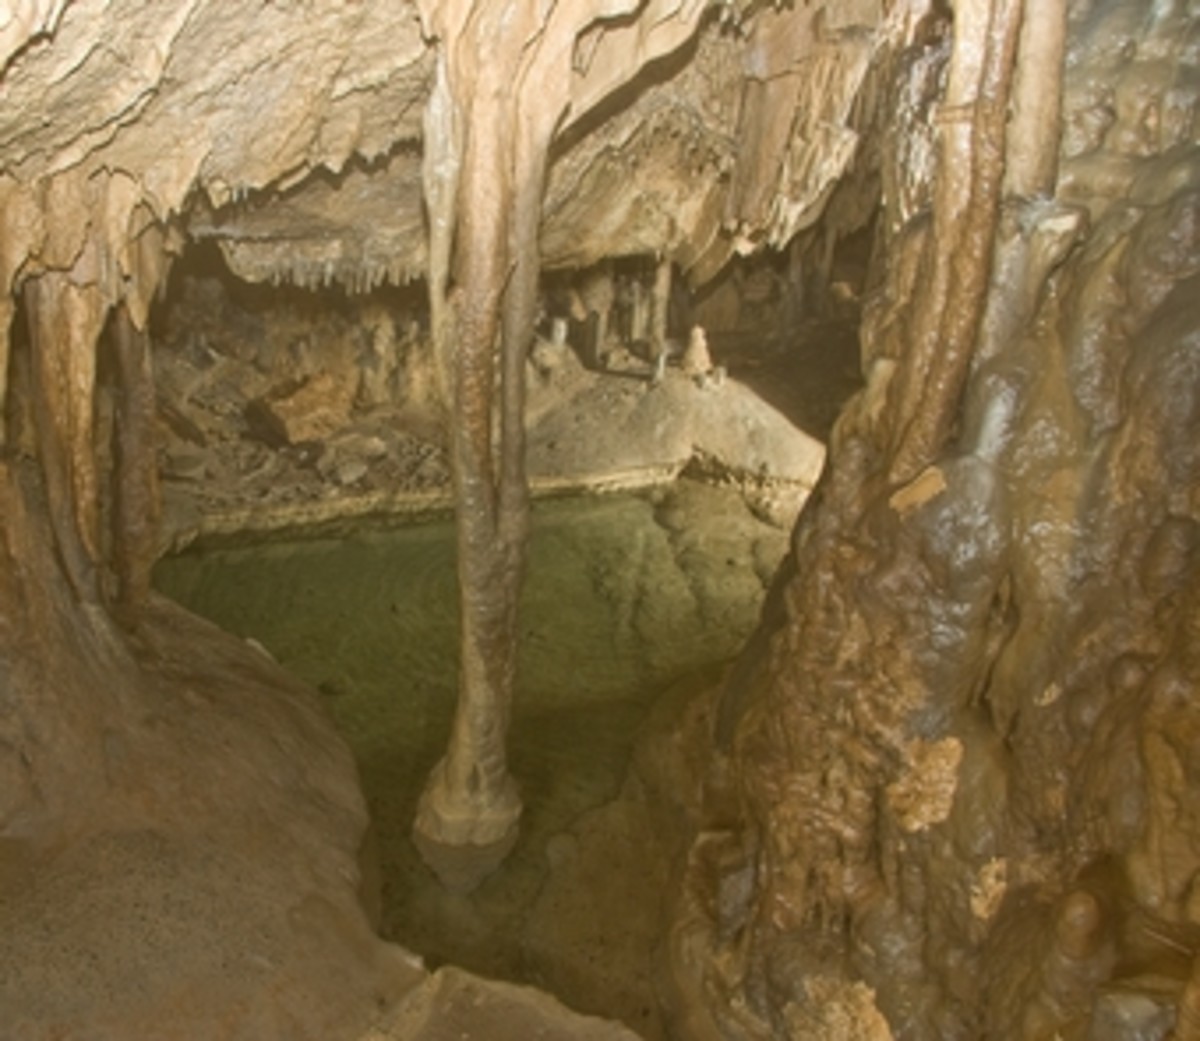 Some of the formations inside the Gap Cave.